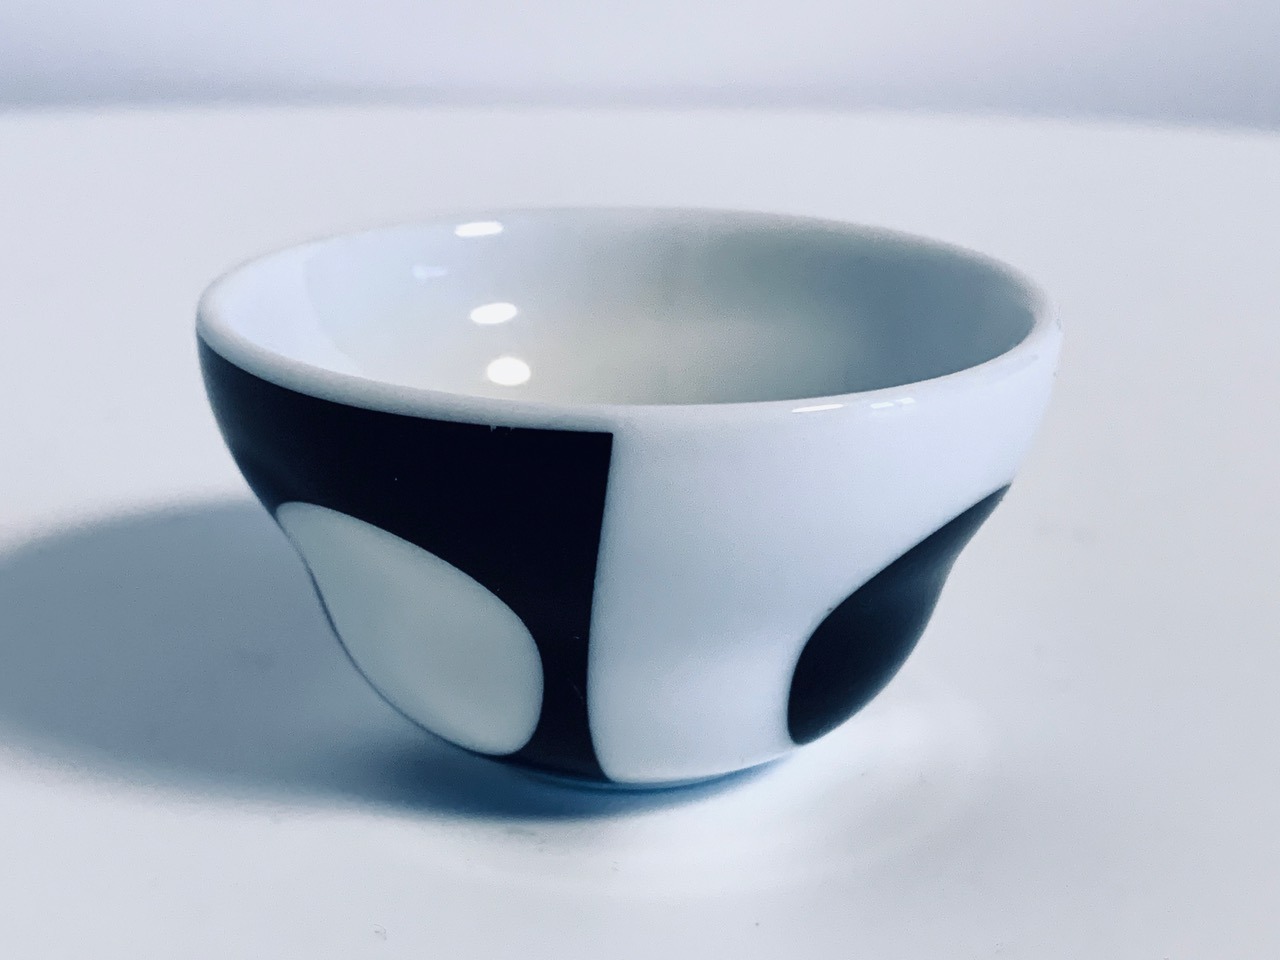 Image of the Verner Panton Menu egg cup black offered in this ad.